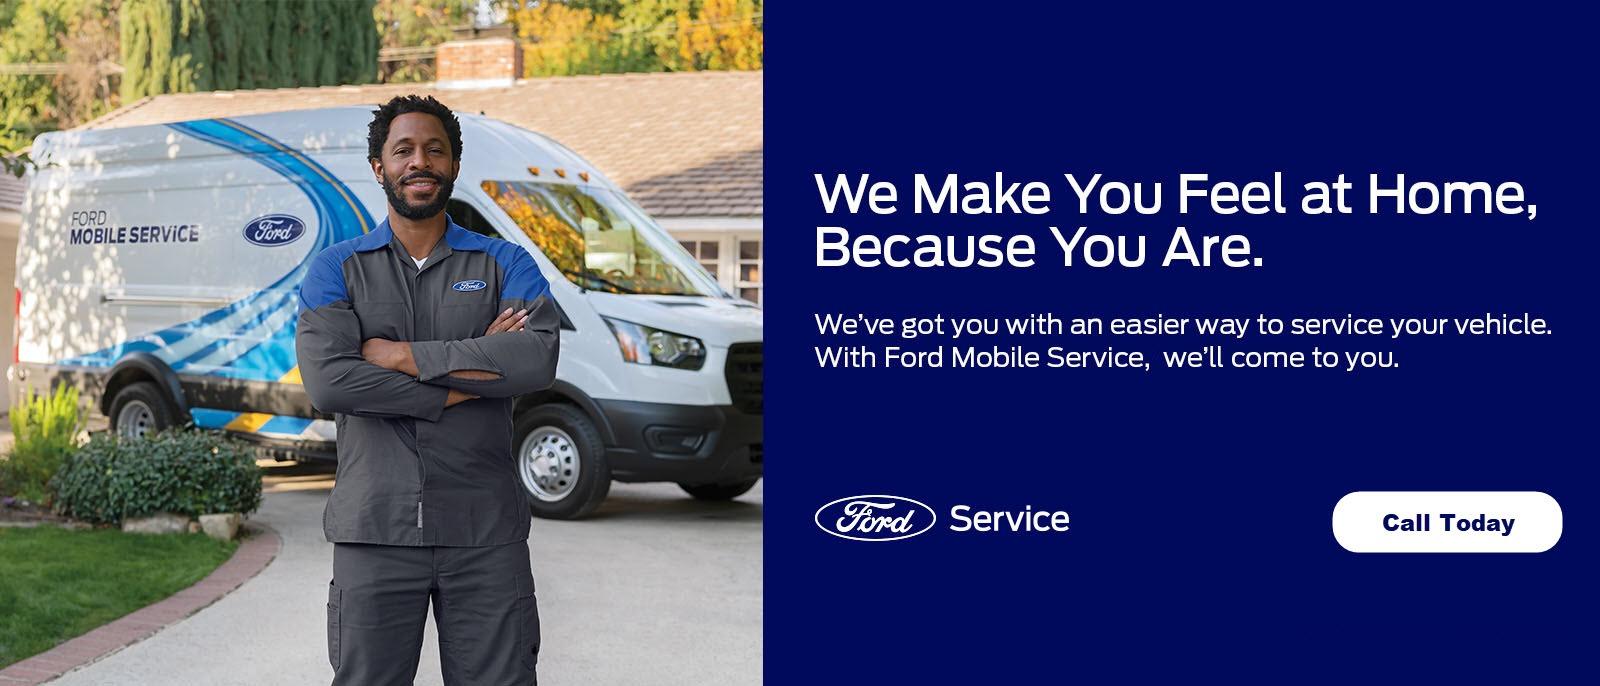 We make you feel at home, Because you are
We've got you with an easier way to service your vehicle.
With Ford Mobile Service, we'll come to you.